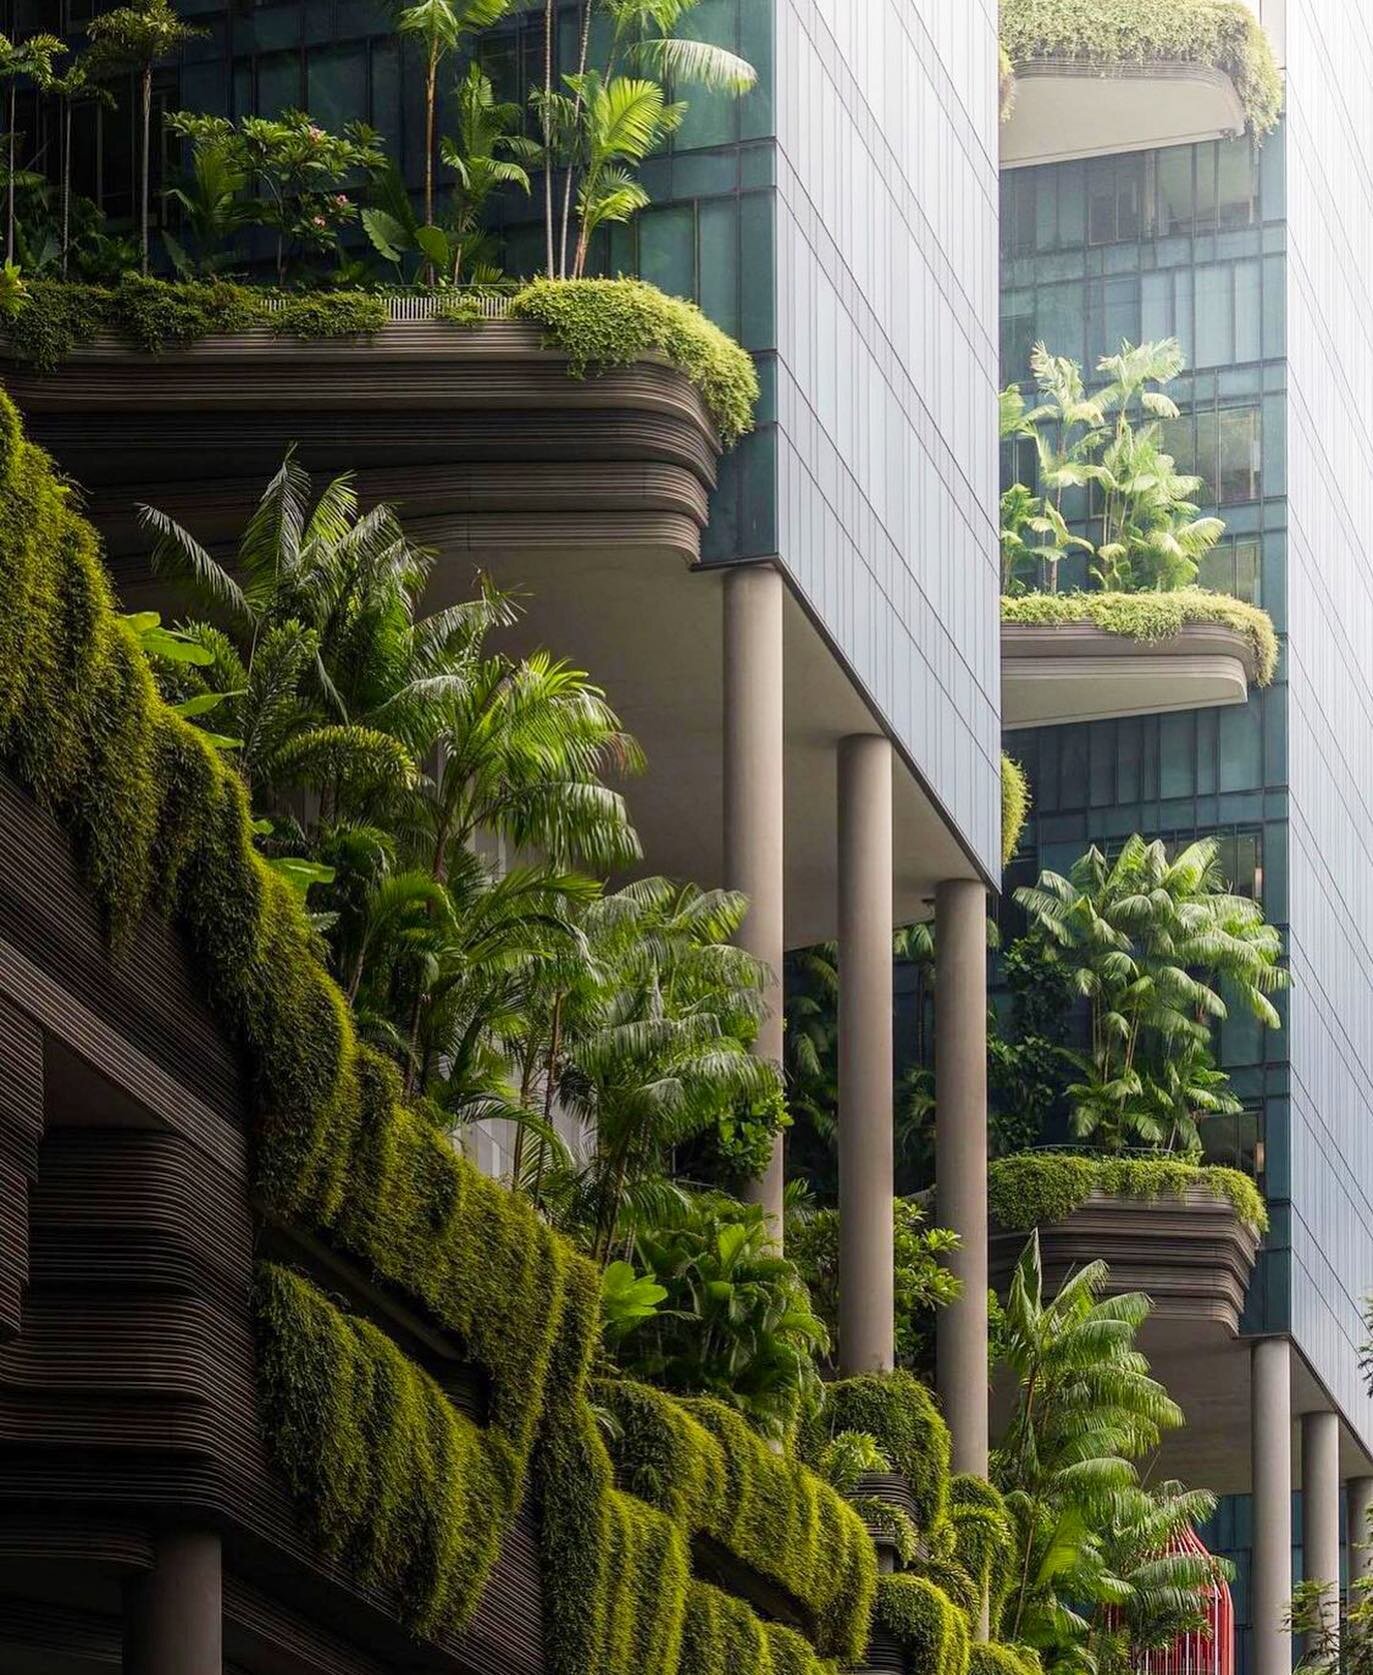 This is how our 21st century cities need to look like. The stacking of dense planting throughout our buildings turns our cities into carbon sponges that help us keep our environment clean, our minds clear and our health in check 🌿 
.
.
.
.
.
.
.
.
.